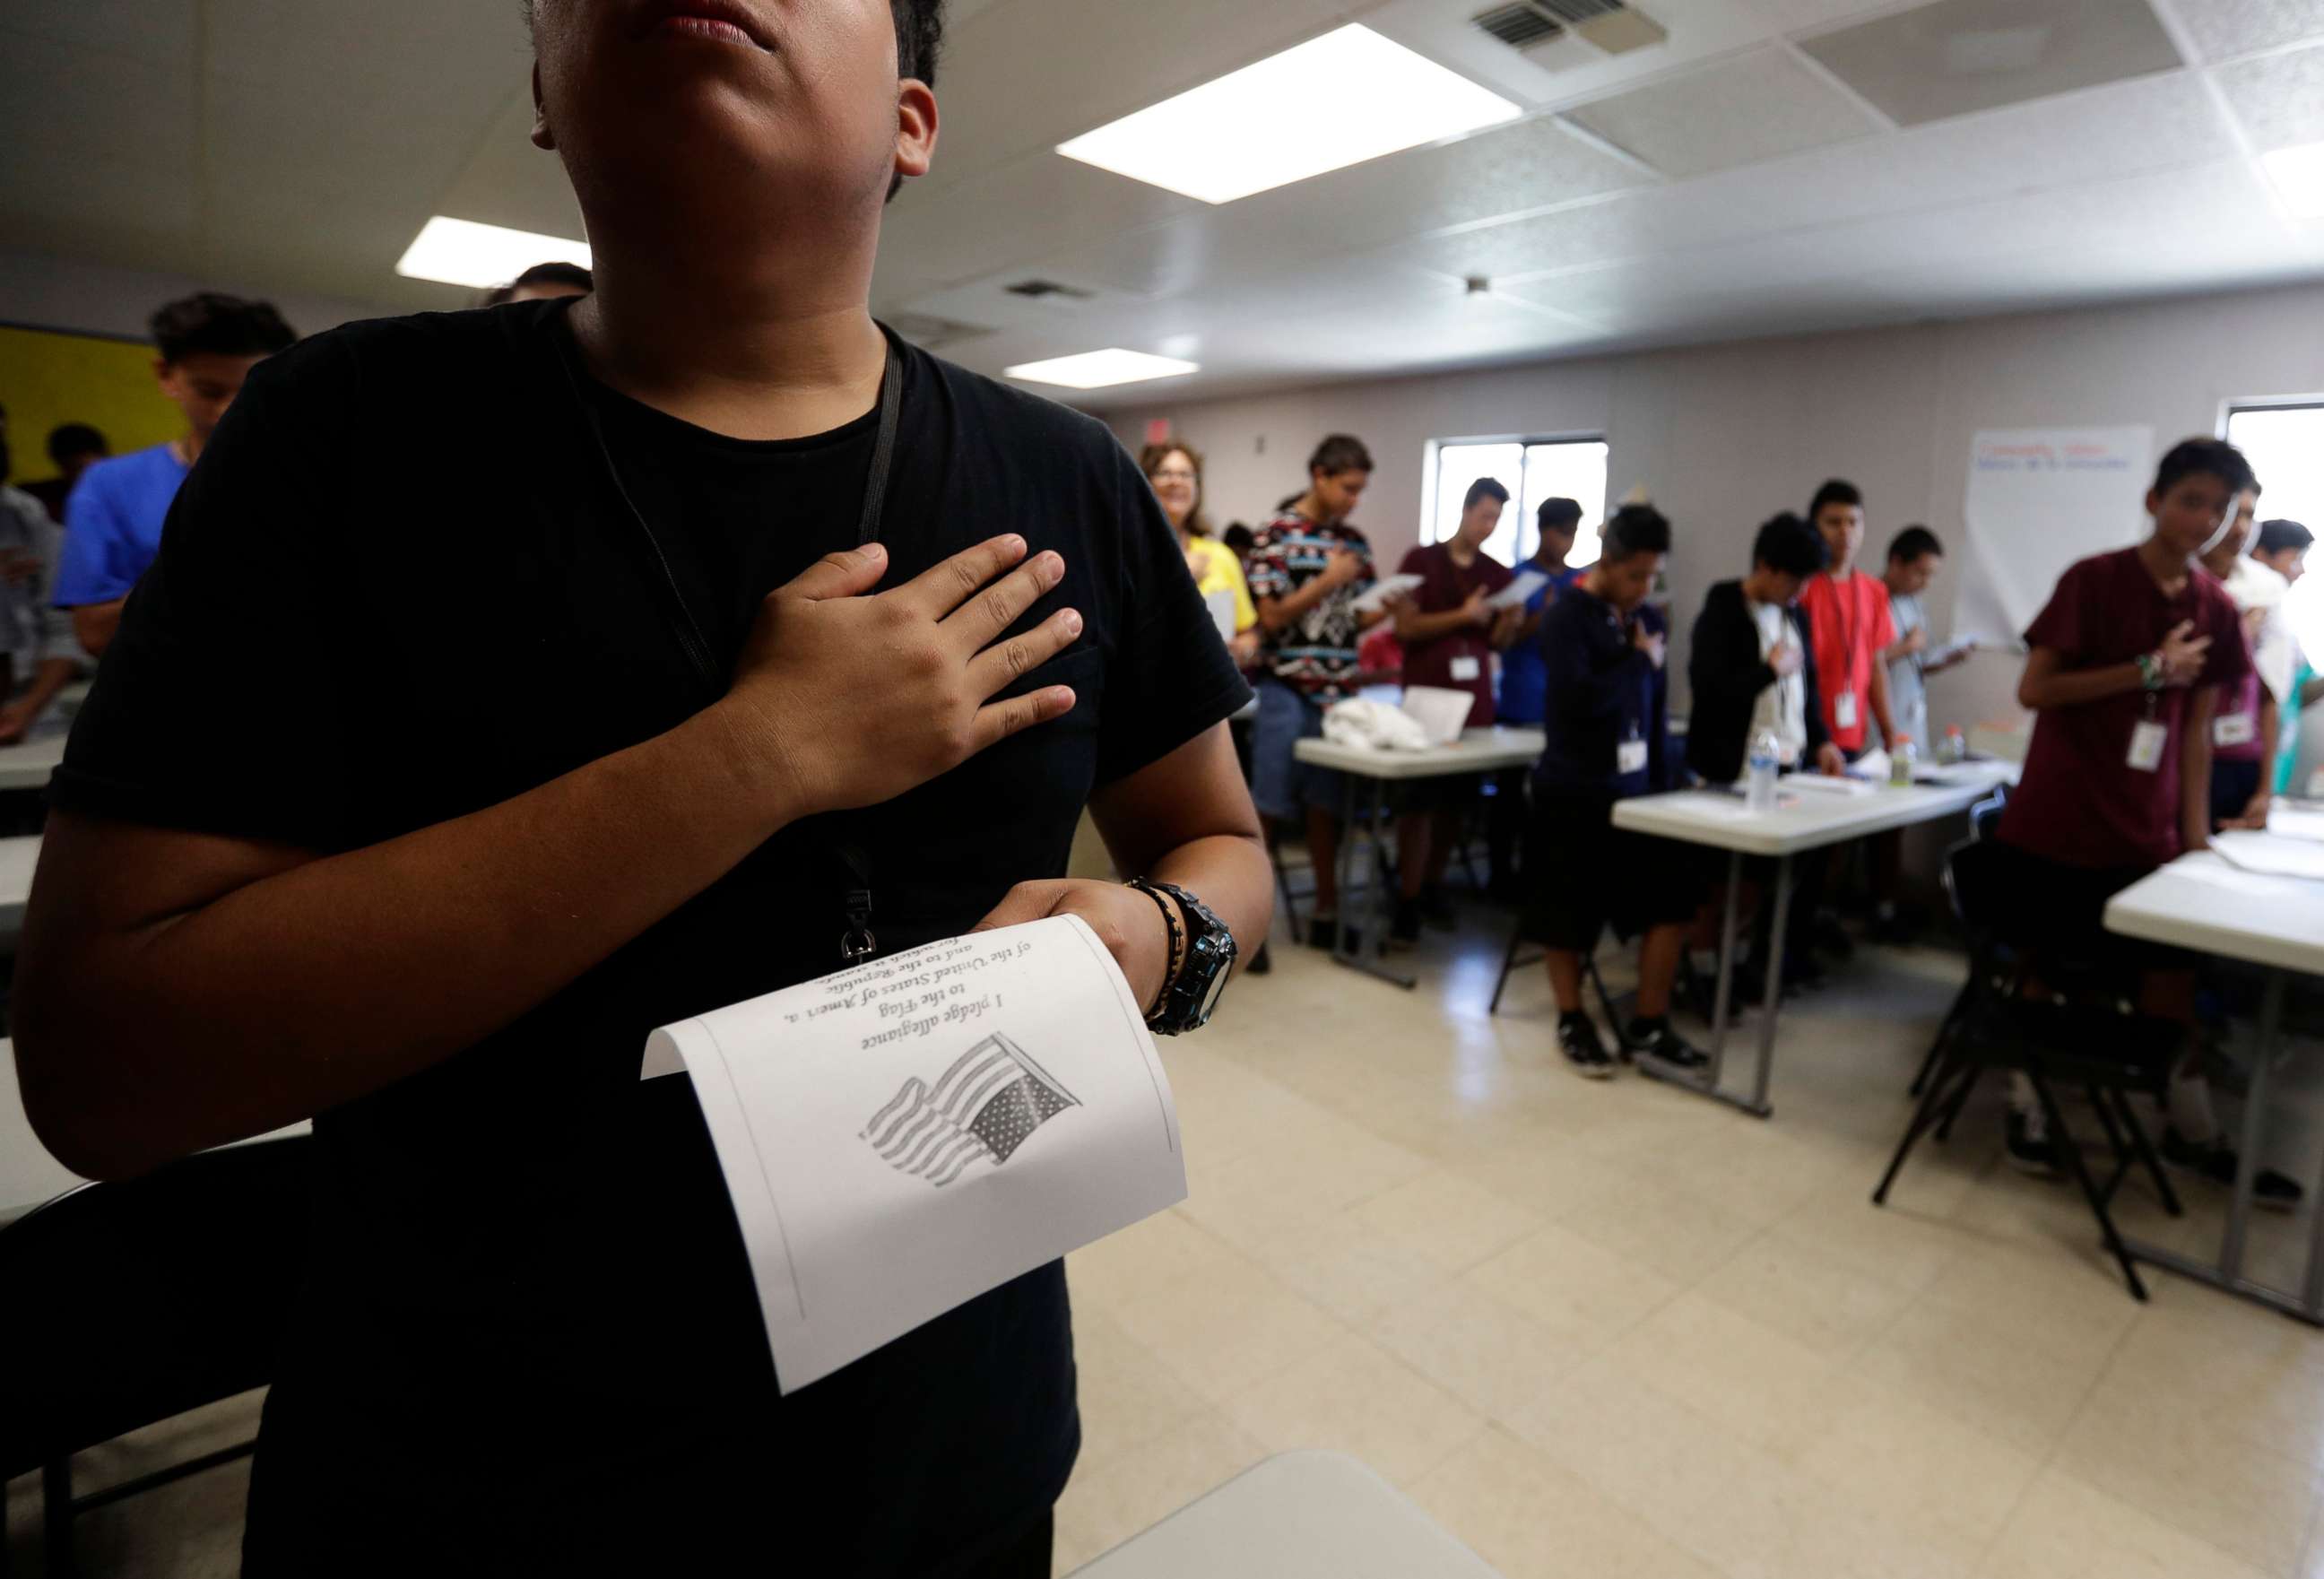 PHOTO: Immigrants say the Pledge of Allegiance in a writing class at the U.S. government's holding center for migrant children in Carrizo Springs, Texas, July 9, 2019.